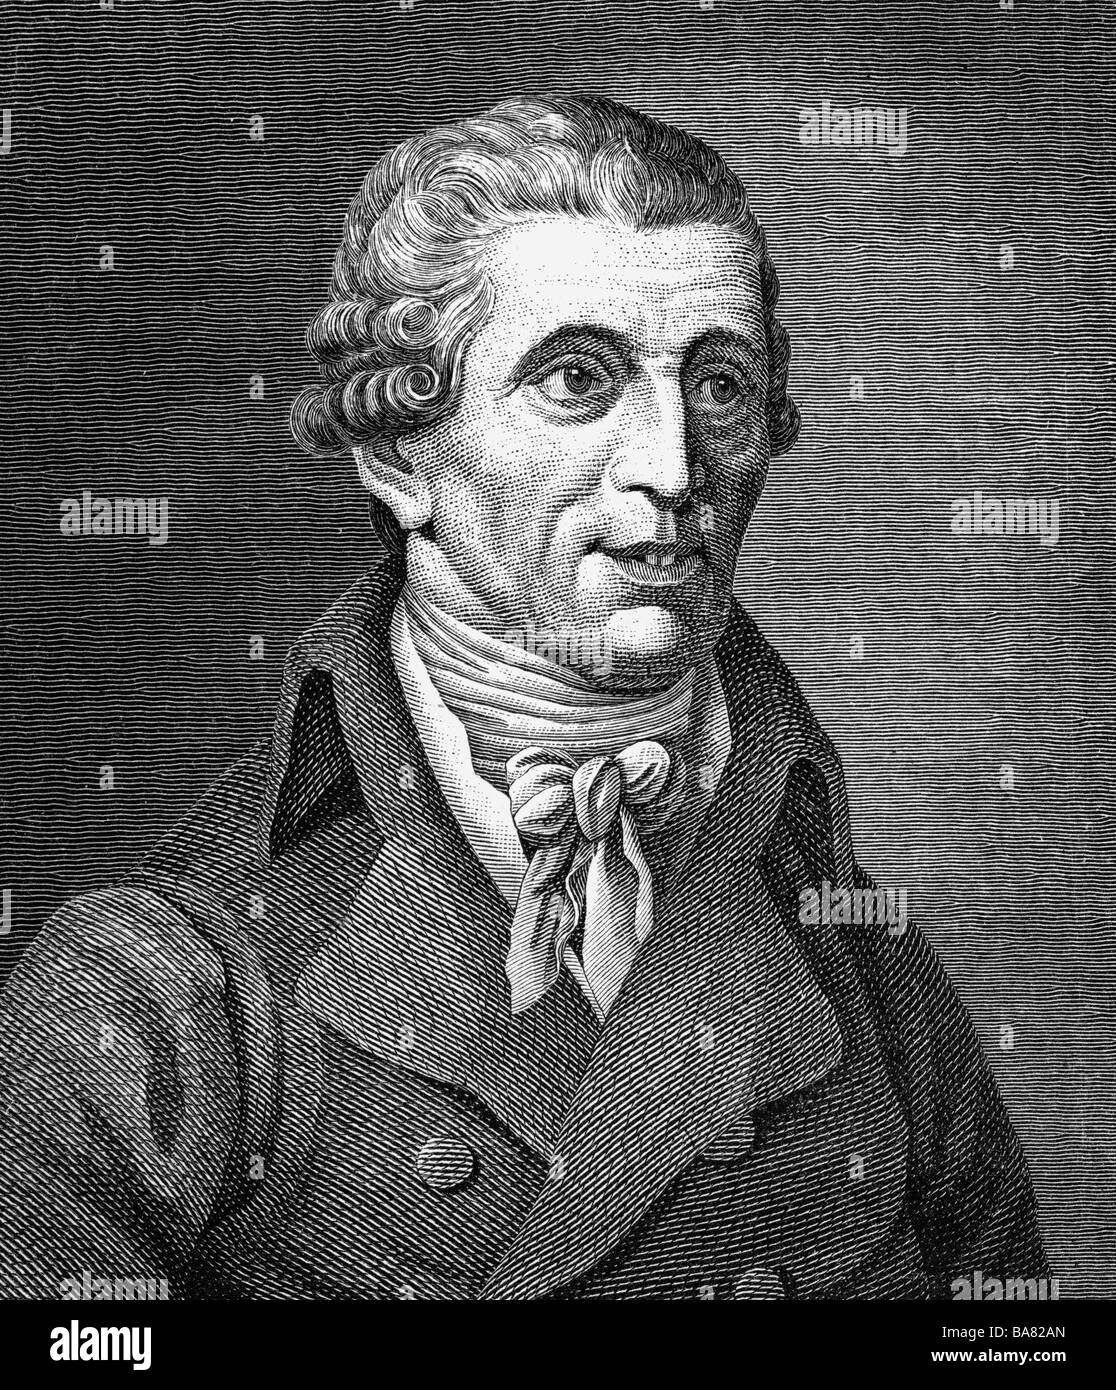 Haydn, Joseph, 31.3.1732 - 31.5.1809, Austrian composer, portrait, steel engraving, 19th century, , Artist's Copyright has not to be cleared Stock Photo